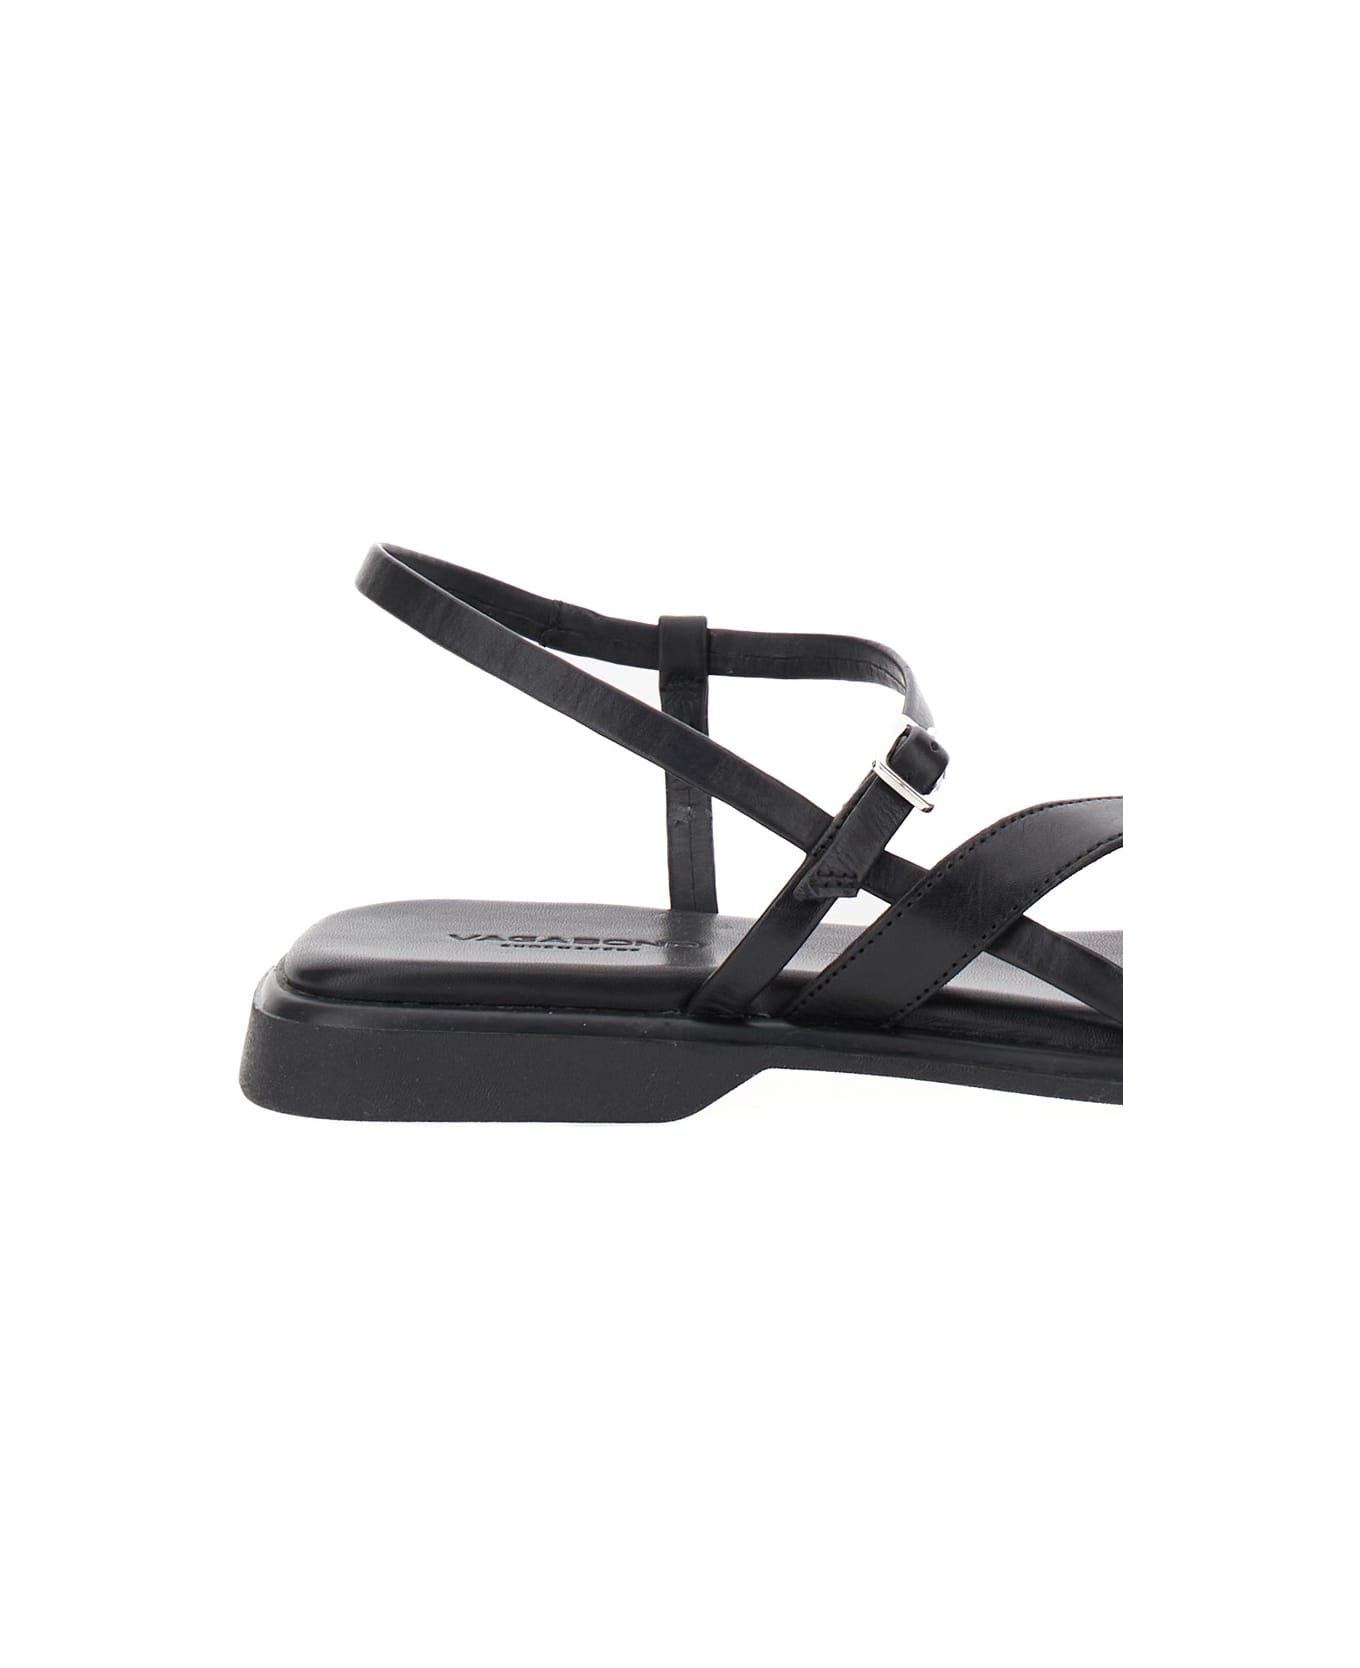 Vagabond 'izzi' Black Thong Sandals With Thin Straps In Leather Woman - Black